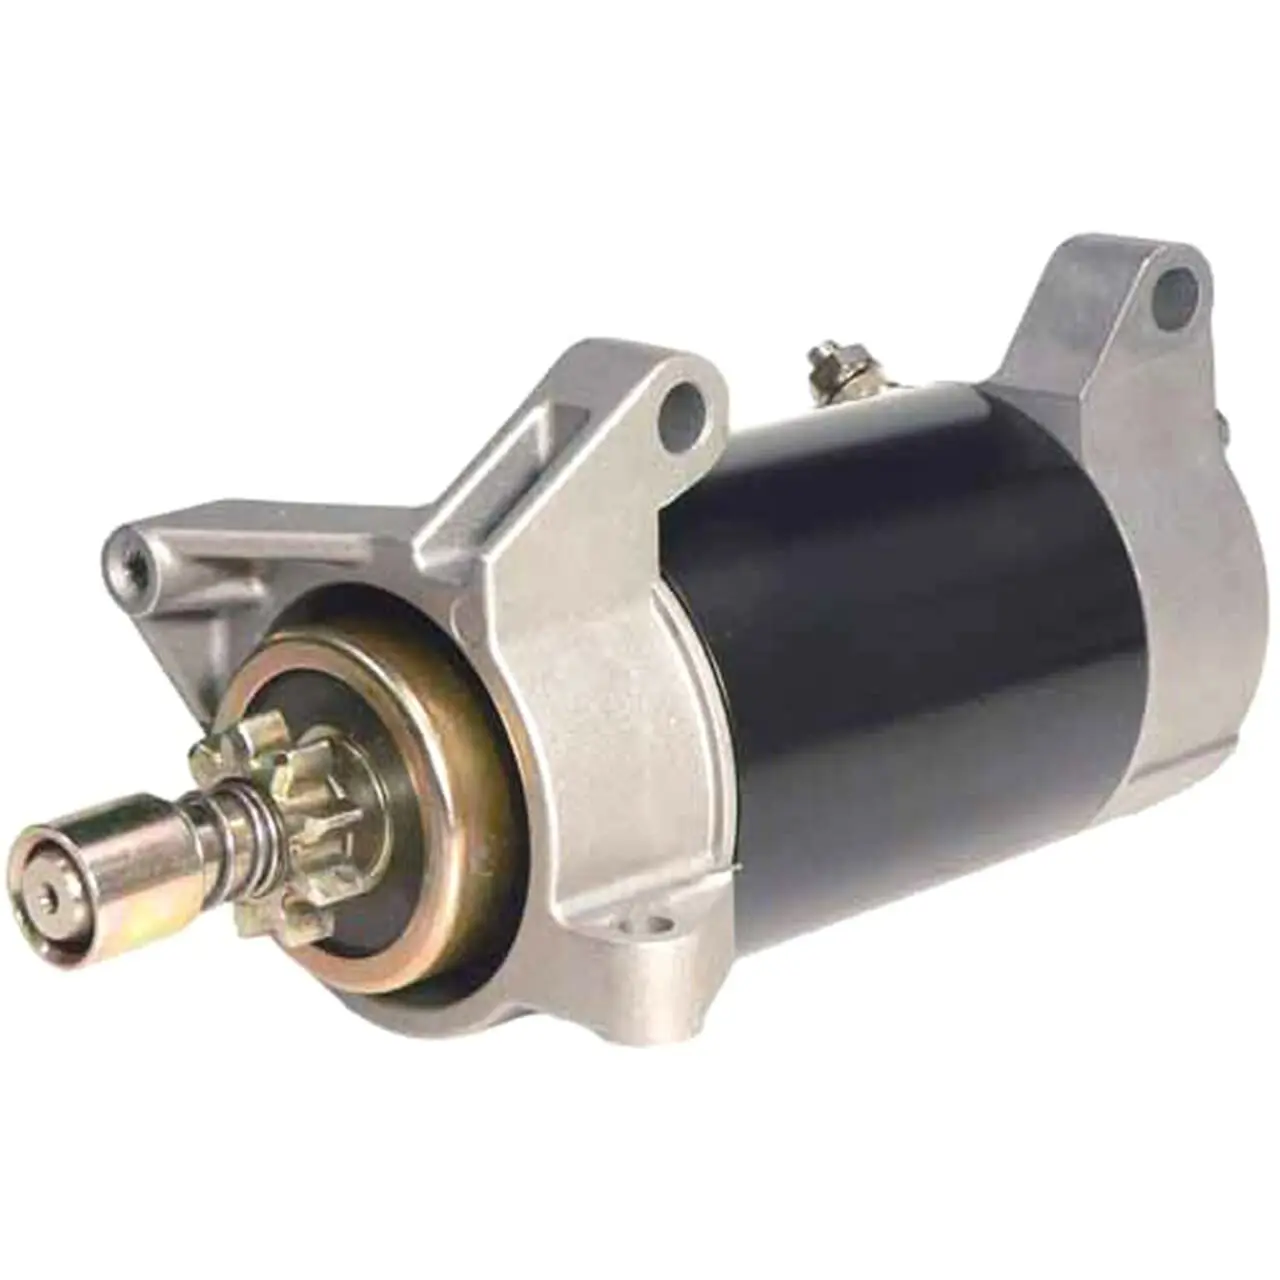 【special-link】smf-starter-motor-for-yamaha-marine-outboard-6h3-81800-10【-just-a-deposit-you-need-to-pay-the-final-payment】